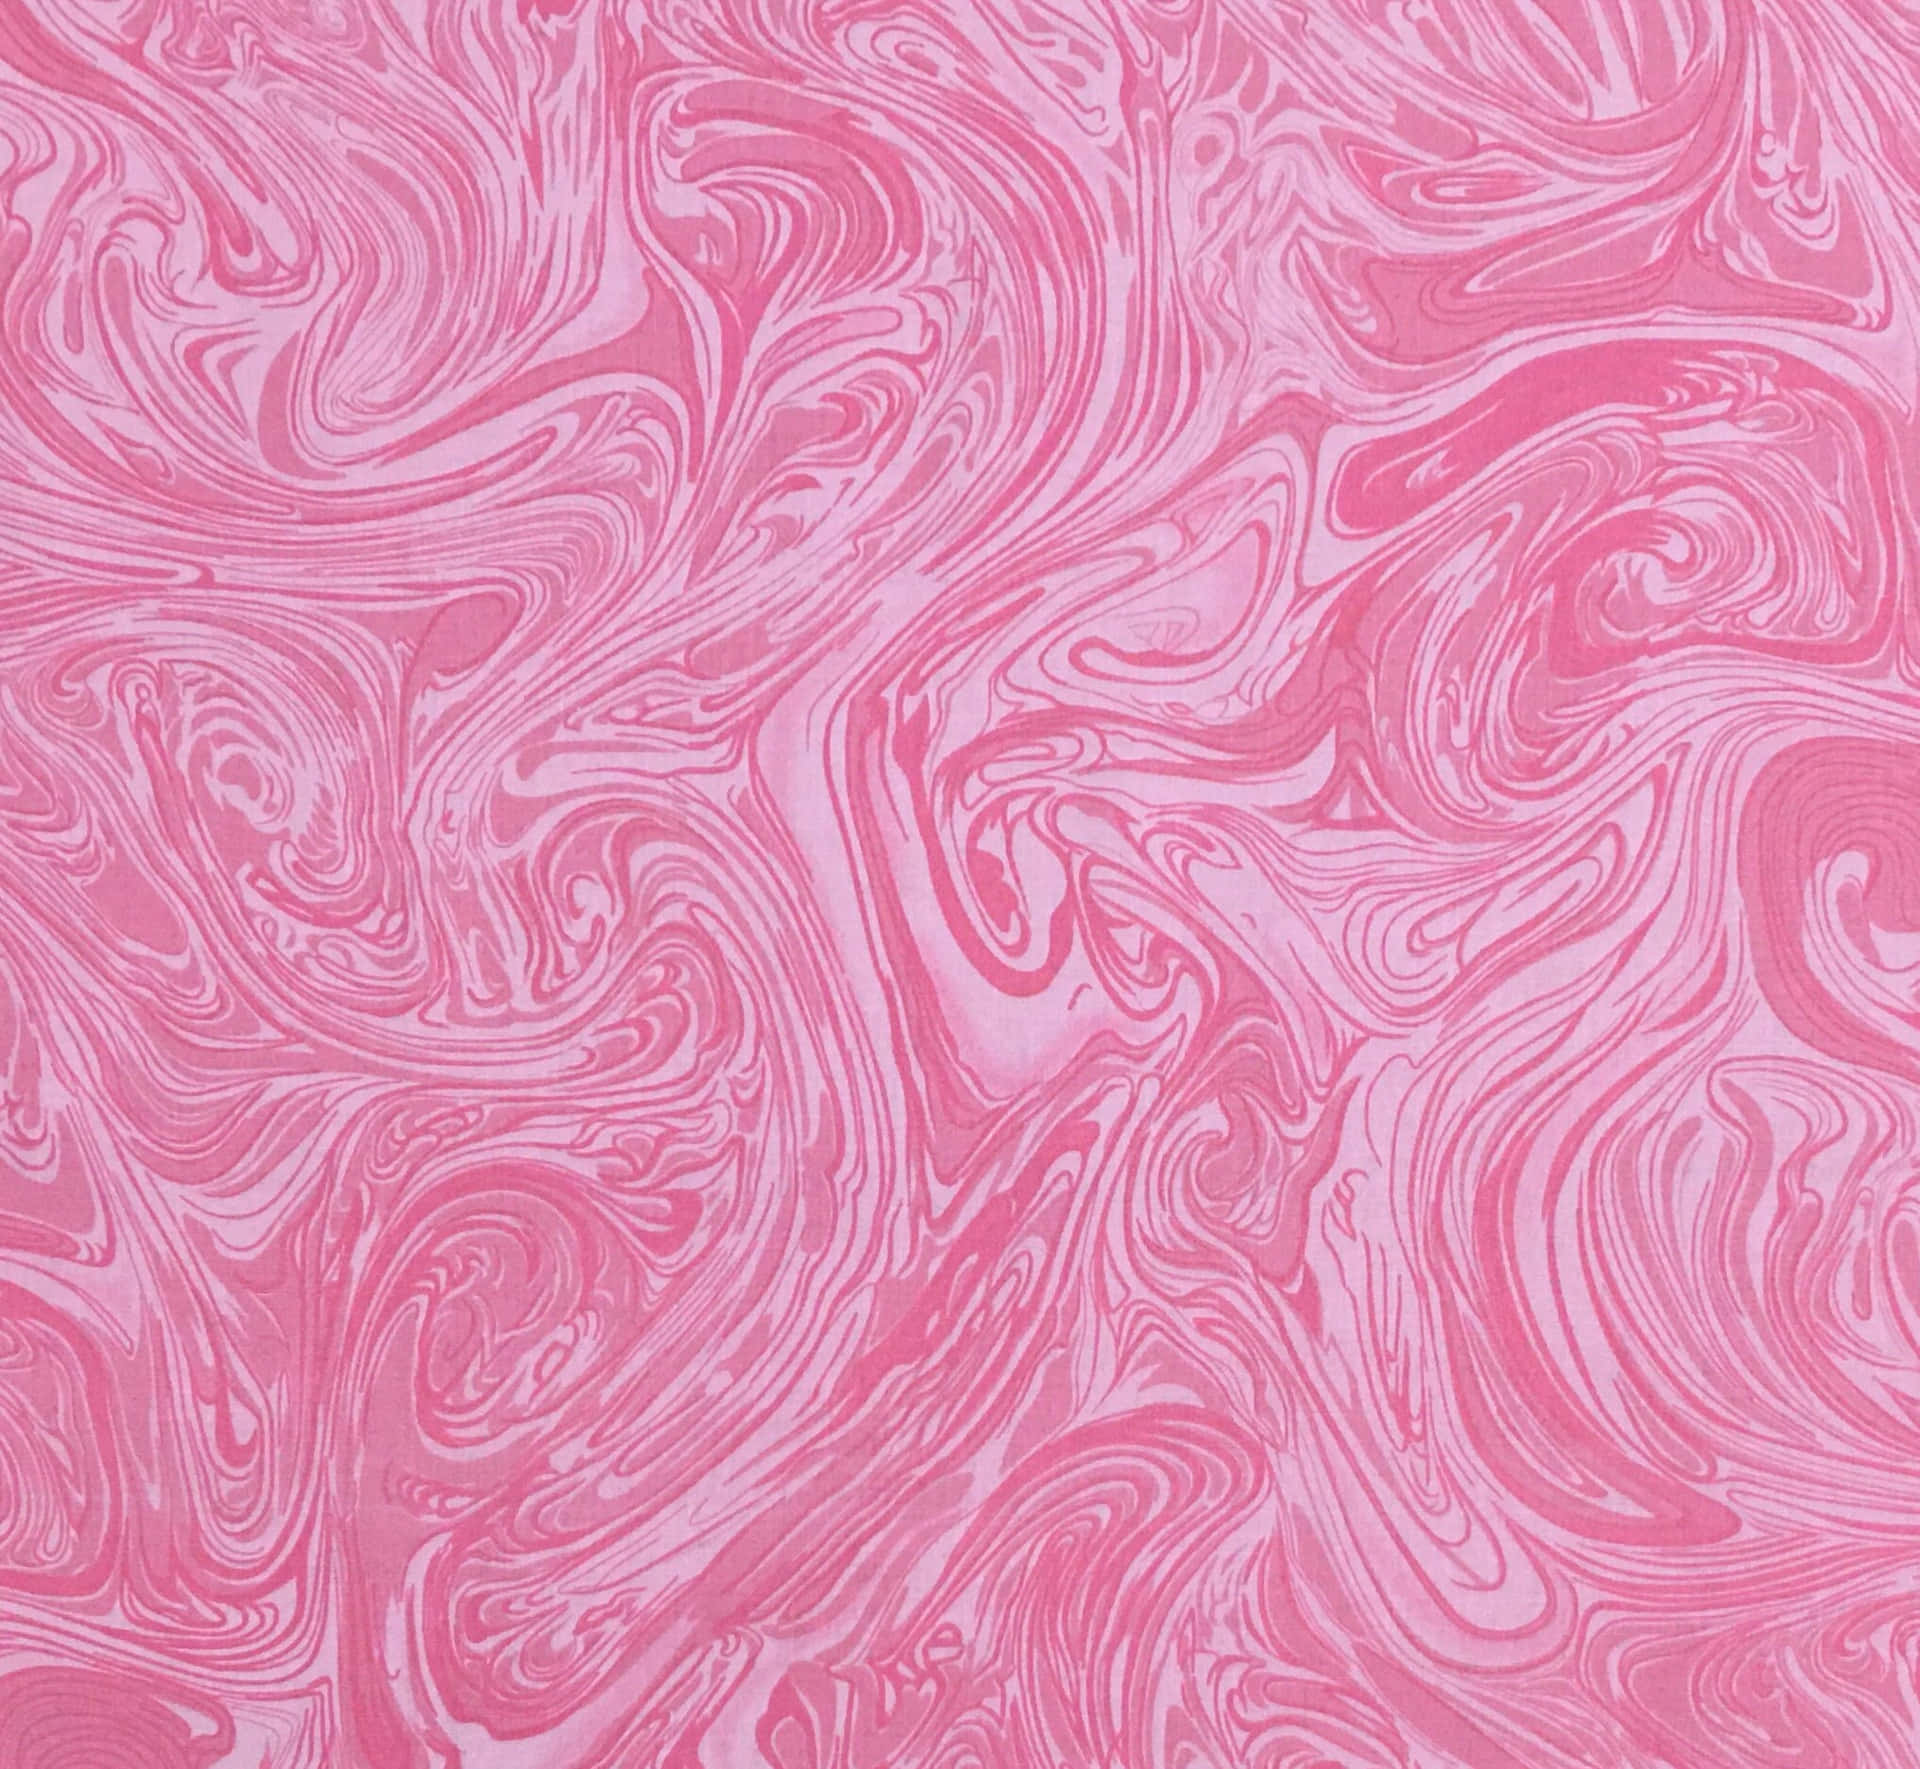 Colorful pink swirl abstract background